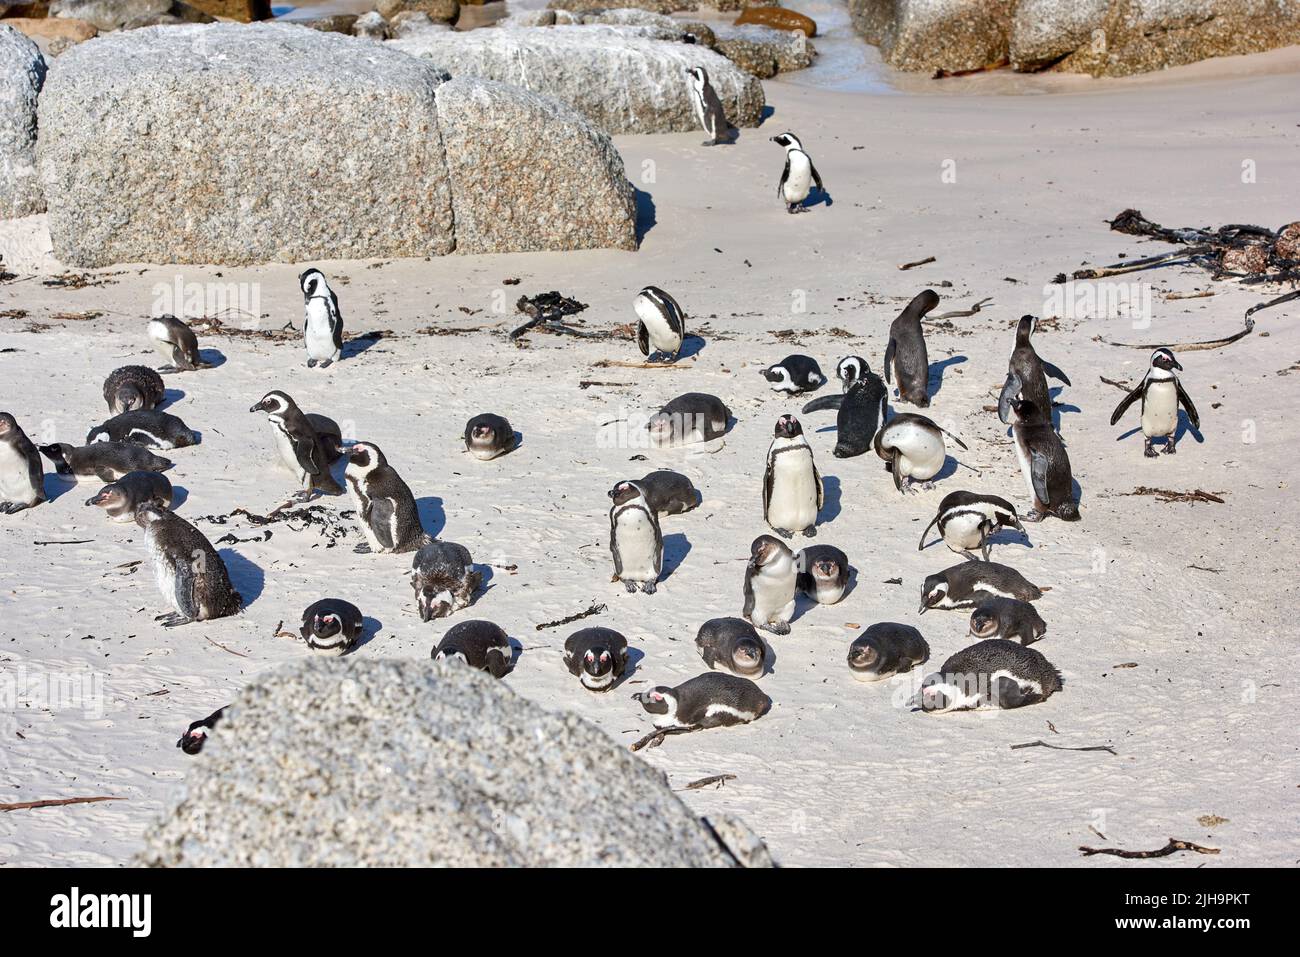 Group of penguins sunbathing near boulders. Flightless birds in their natural habitat. Colony of endangered black footed or Cape penguin species at Stock Photo